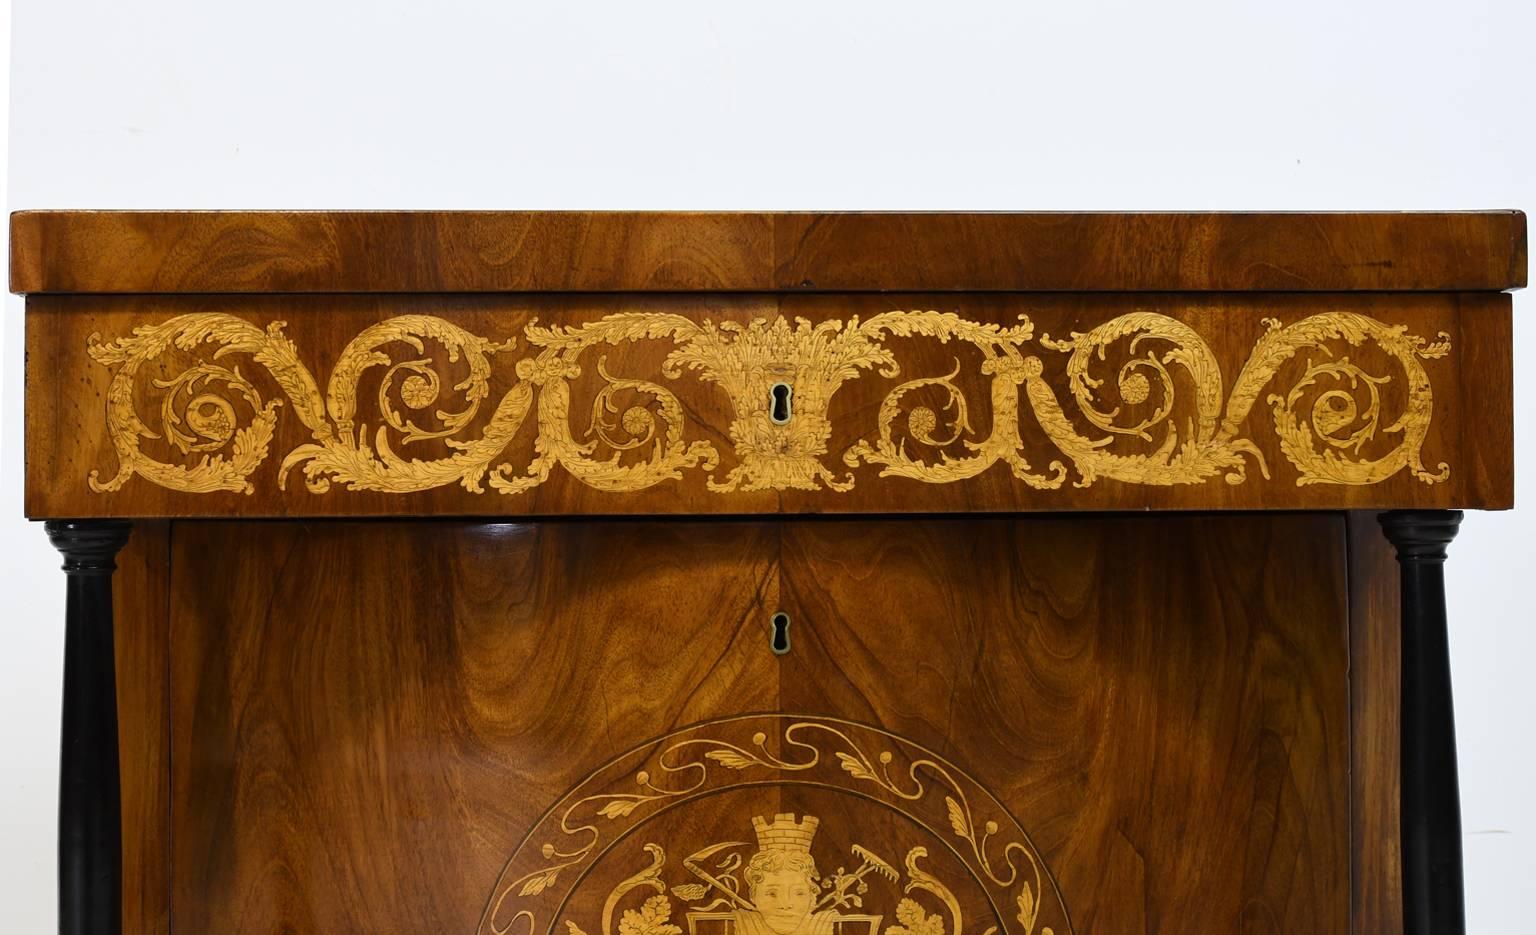 Ebonized Biedermeier Chest of Drawers in Mahogany with Marquetry Inlays, Germany